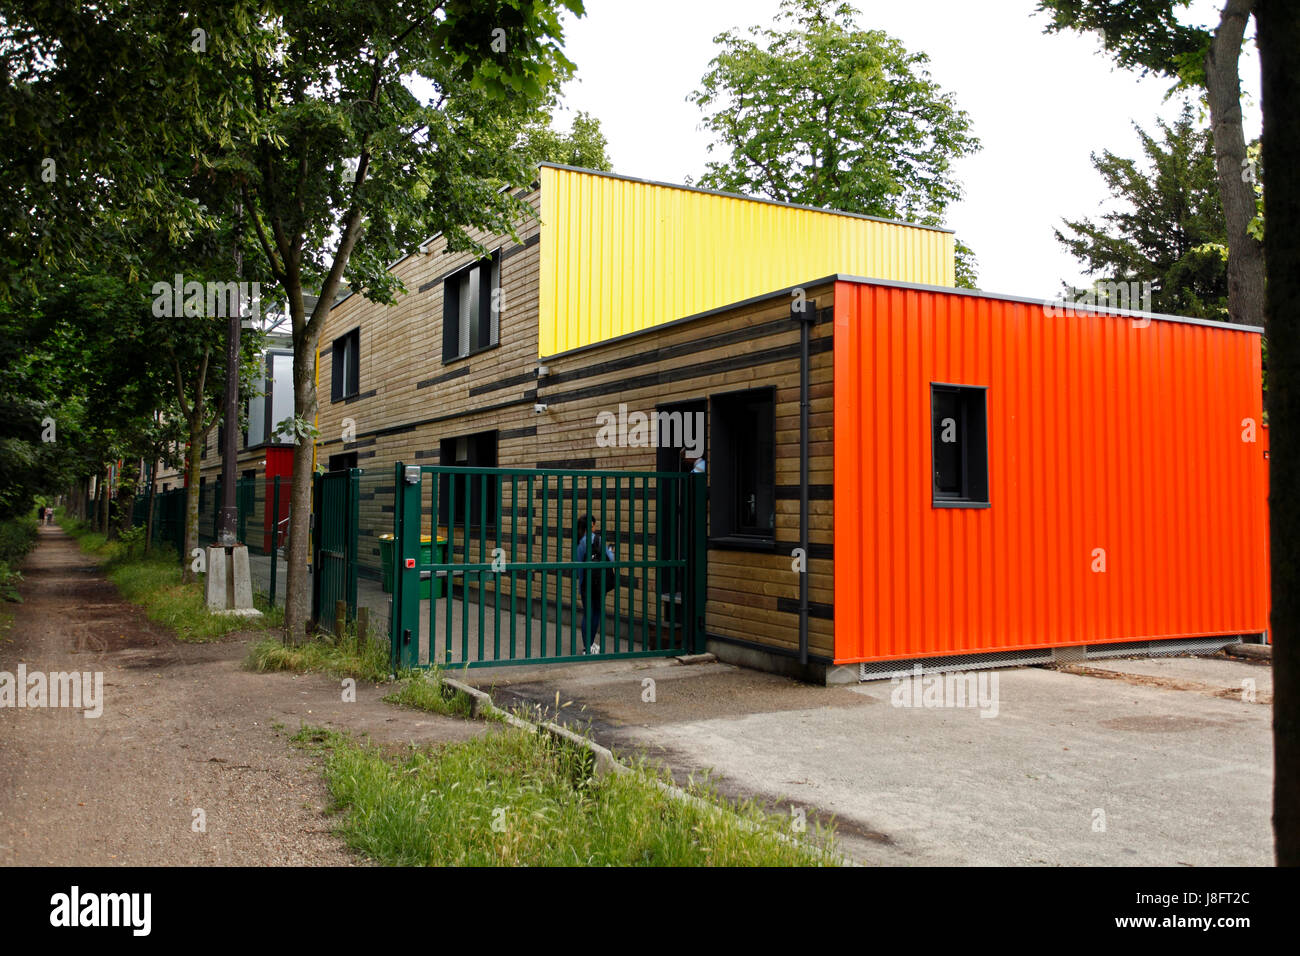 Containerville housing alongside the Allee de fortifications in PAris, France. Cheap temporary housing in cities, made from shipping containers. Stock Photo